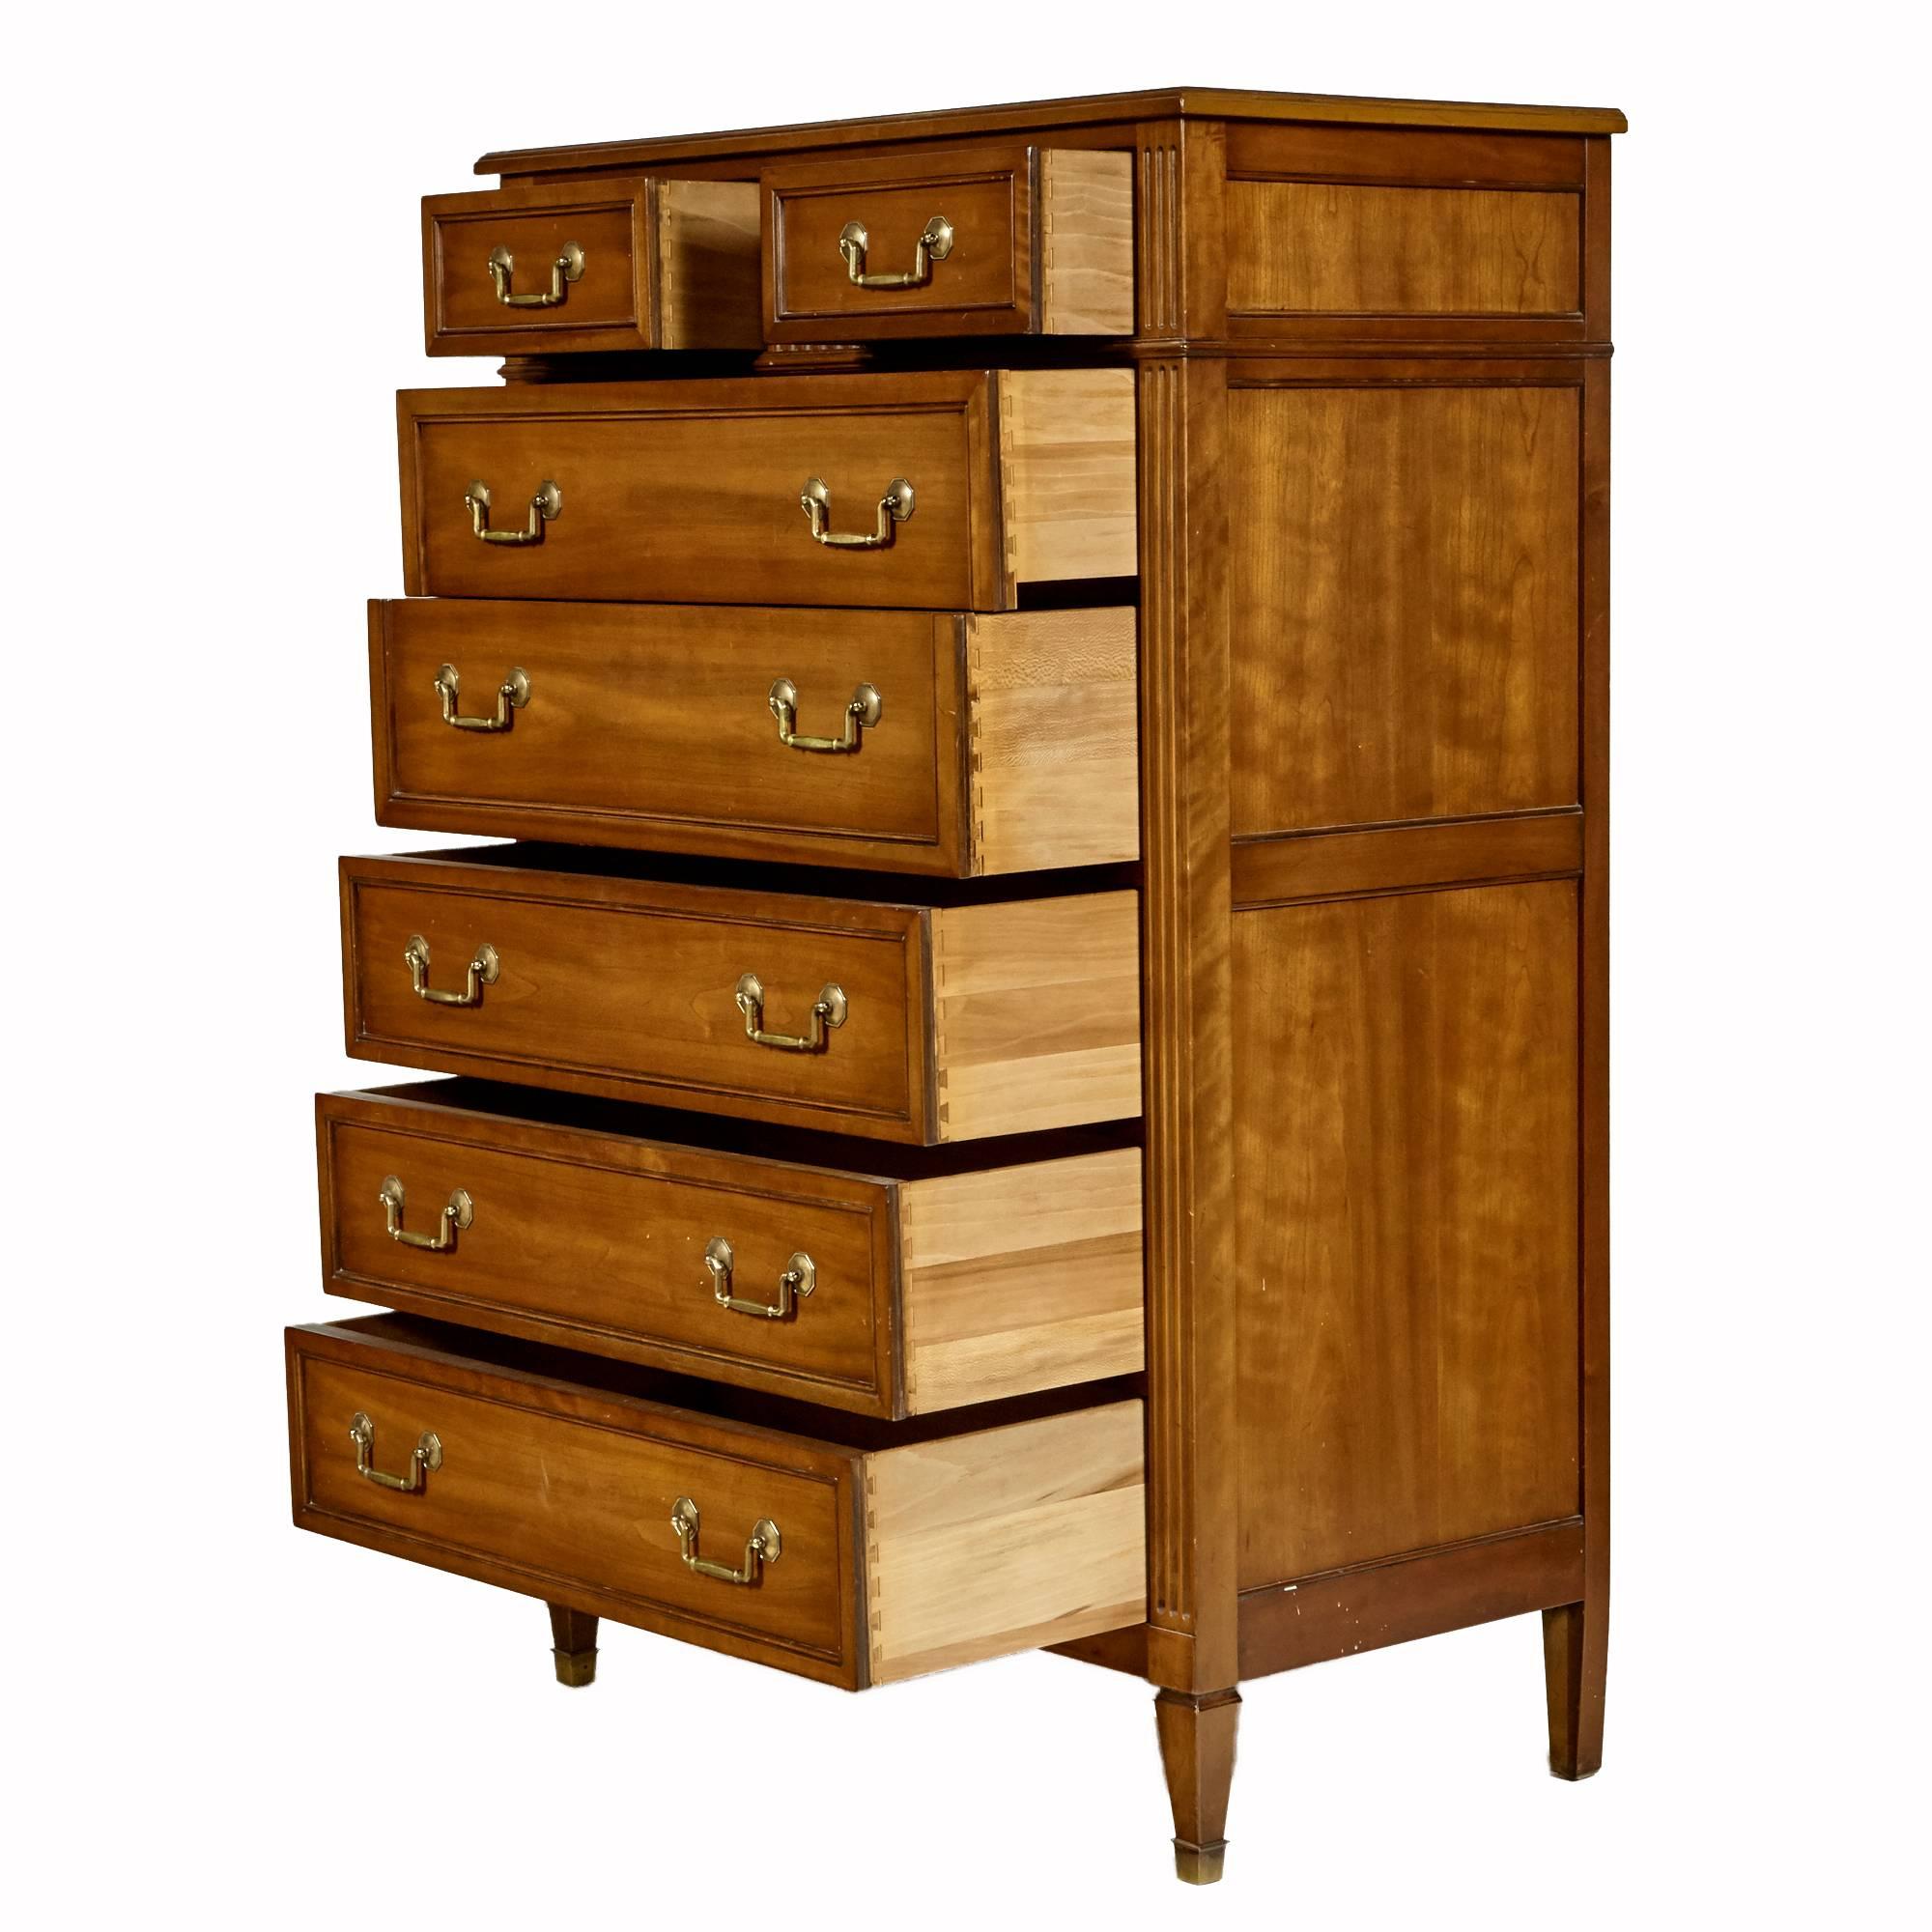 Vintage 1960s tall cherrywood dresser by Kindel Furniture Co of Grand Rapids MI. The dresser has seven drawers and brass accents on the feet with the Belvedere finish. Marked.